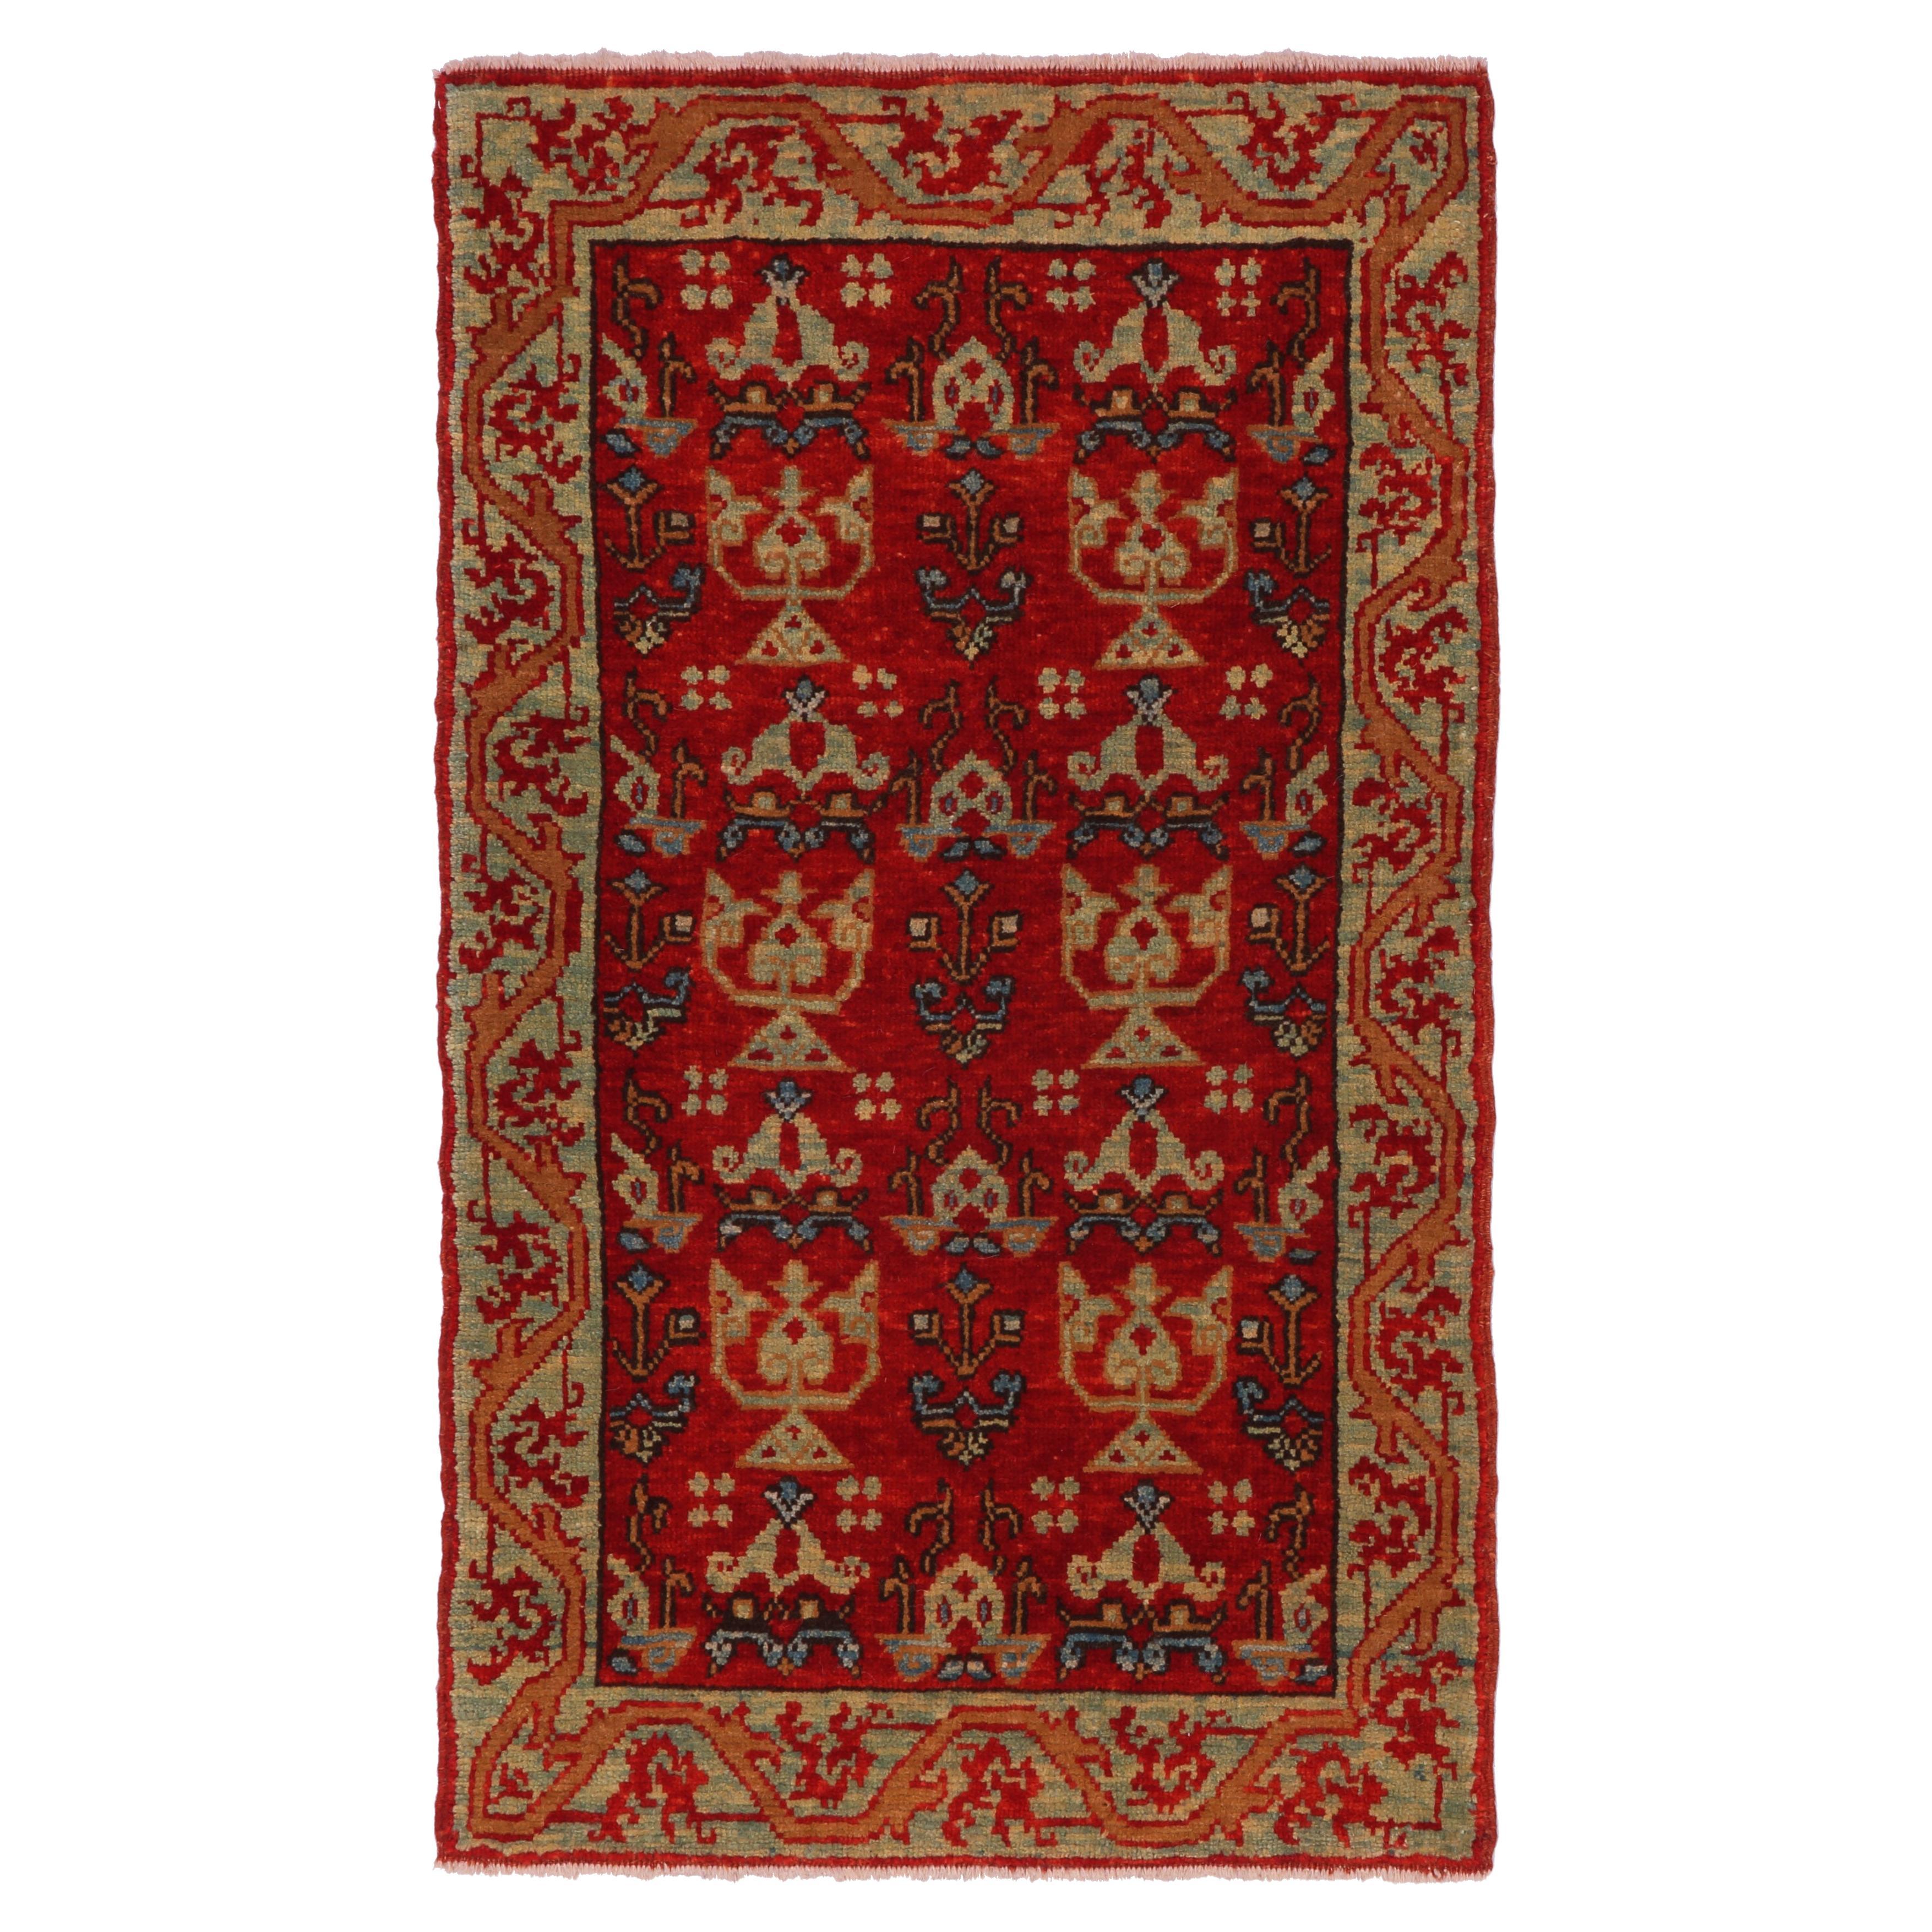 Ararat Rugs Mamluk Wagireh Rug with Candelabra Elems Revival Carpet Natural Dyed For Sale